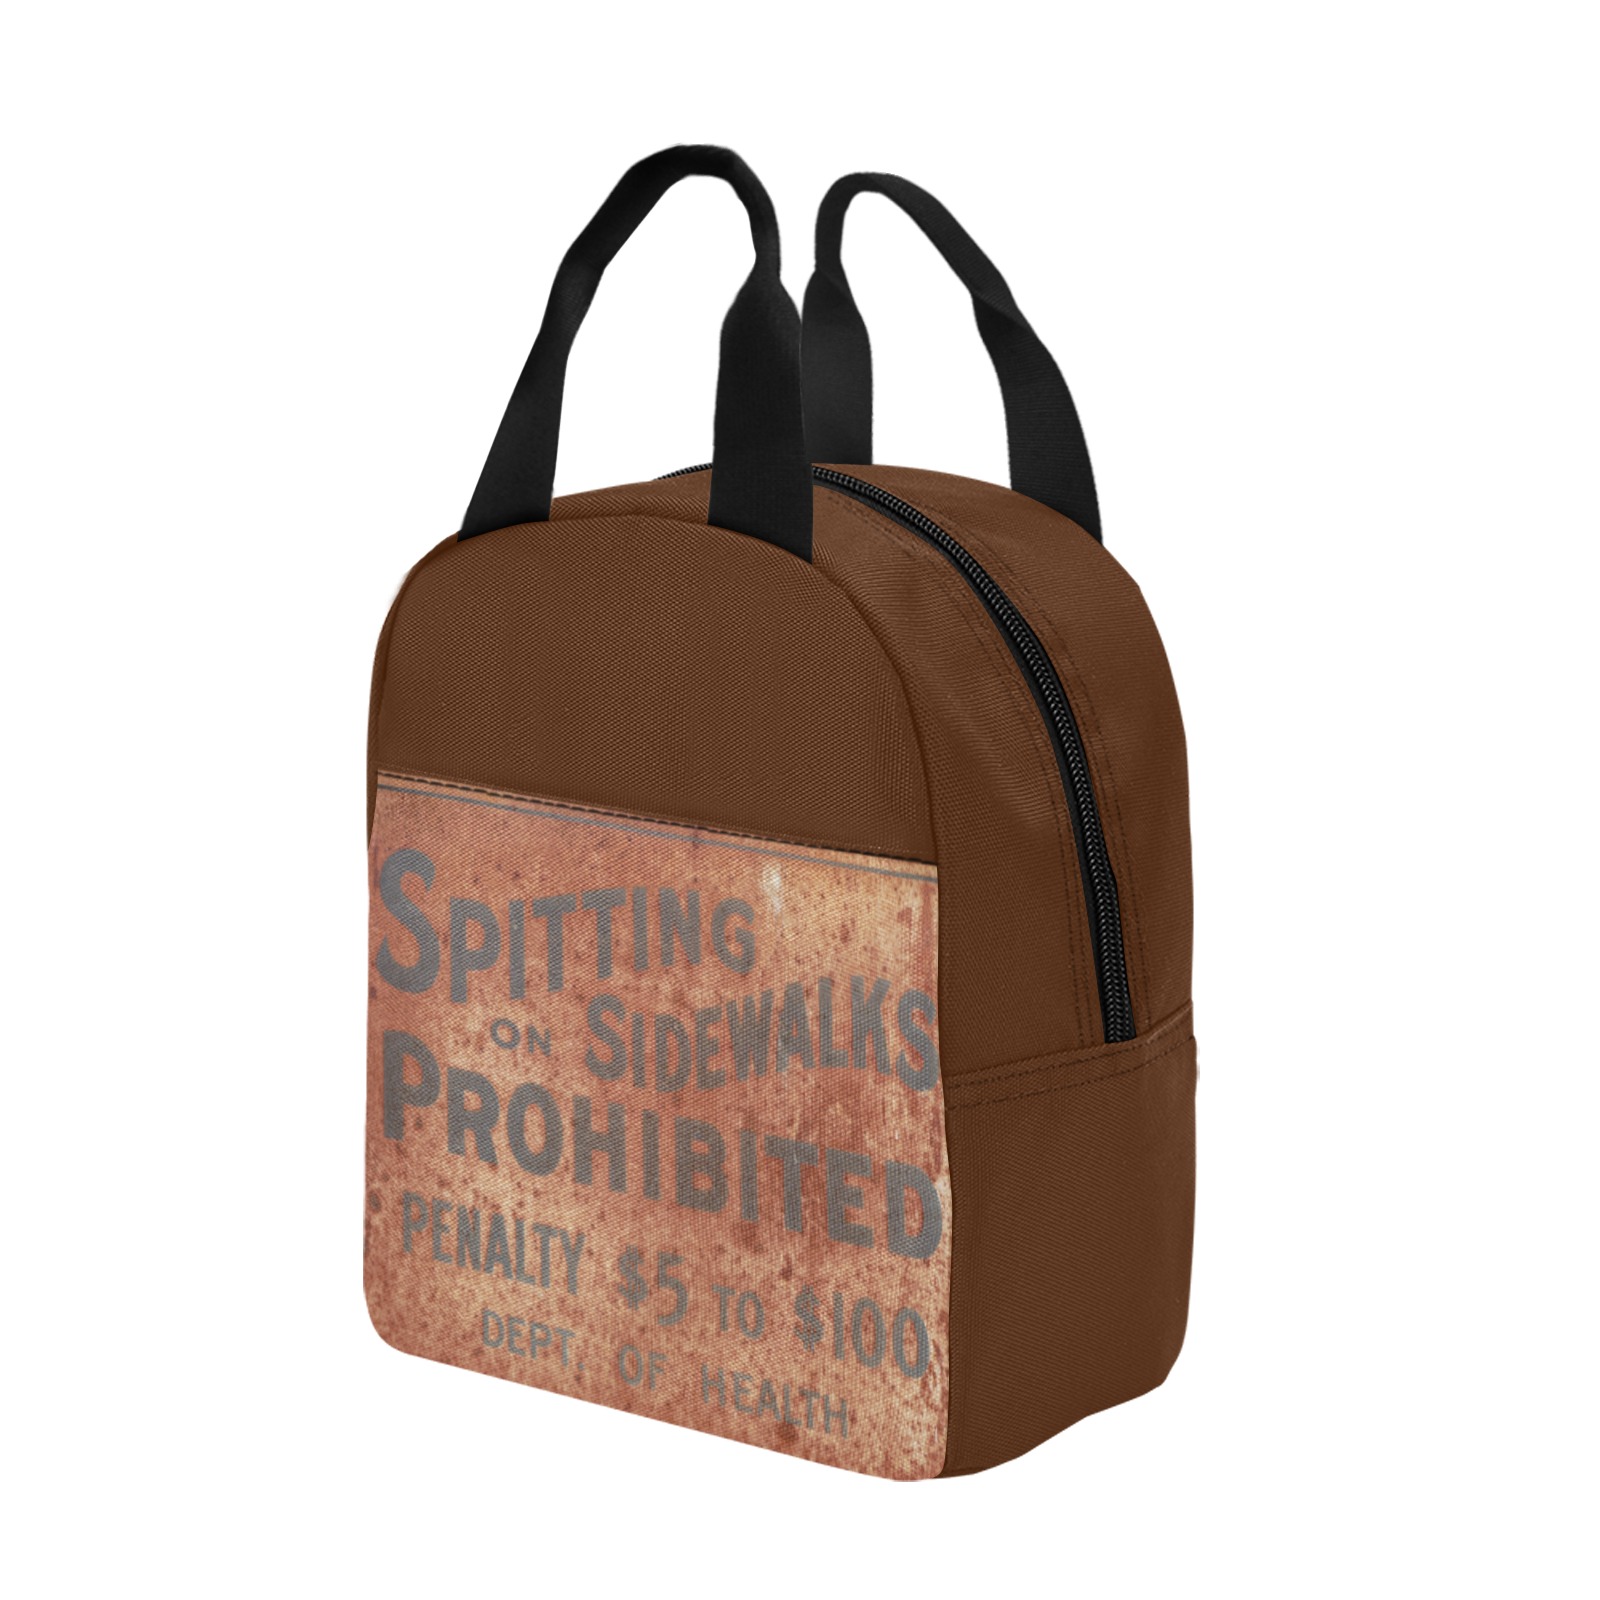 Spitting prohibited, penalty, photo Zipper Lunch Bag (Model 1720)